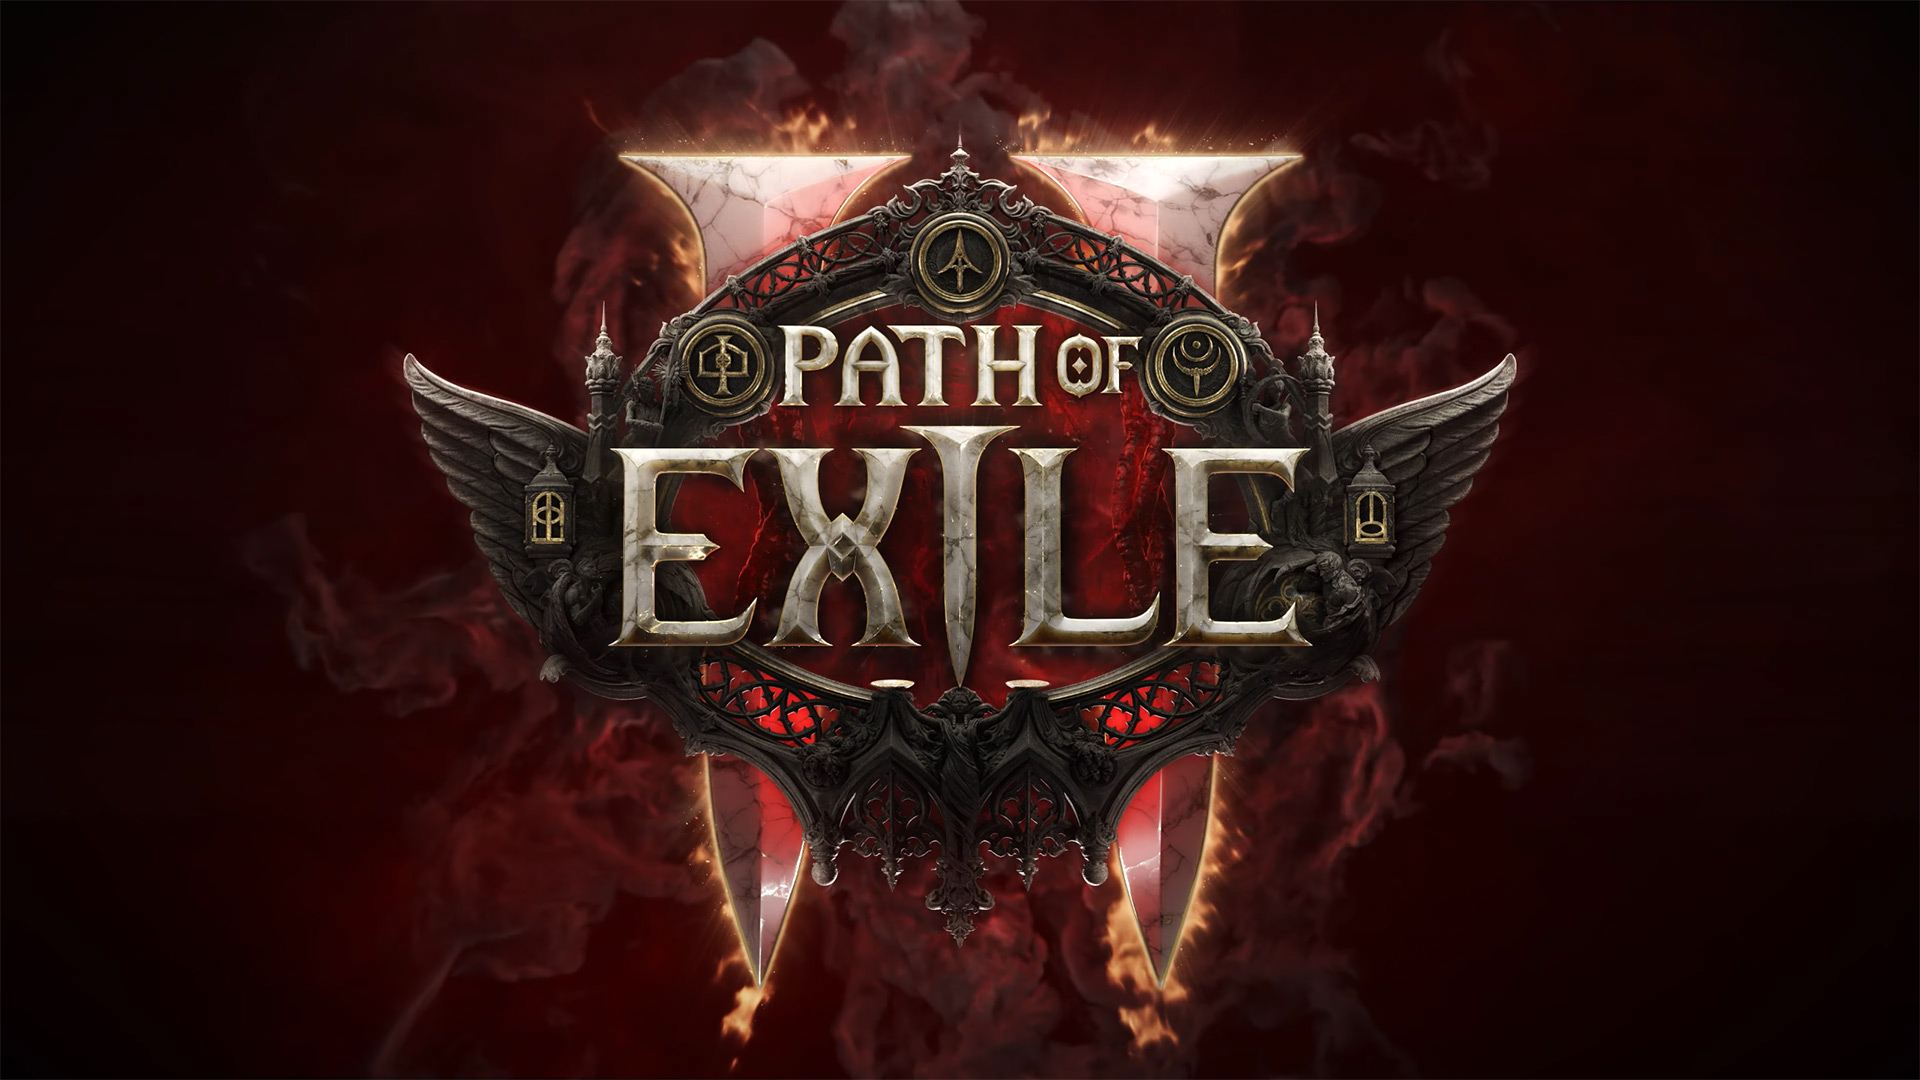 Path of Exile 2 is no longer an expansion to Path of Exile 1